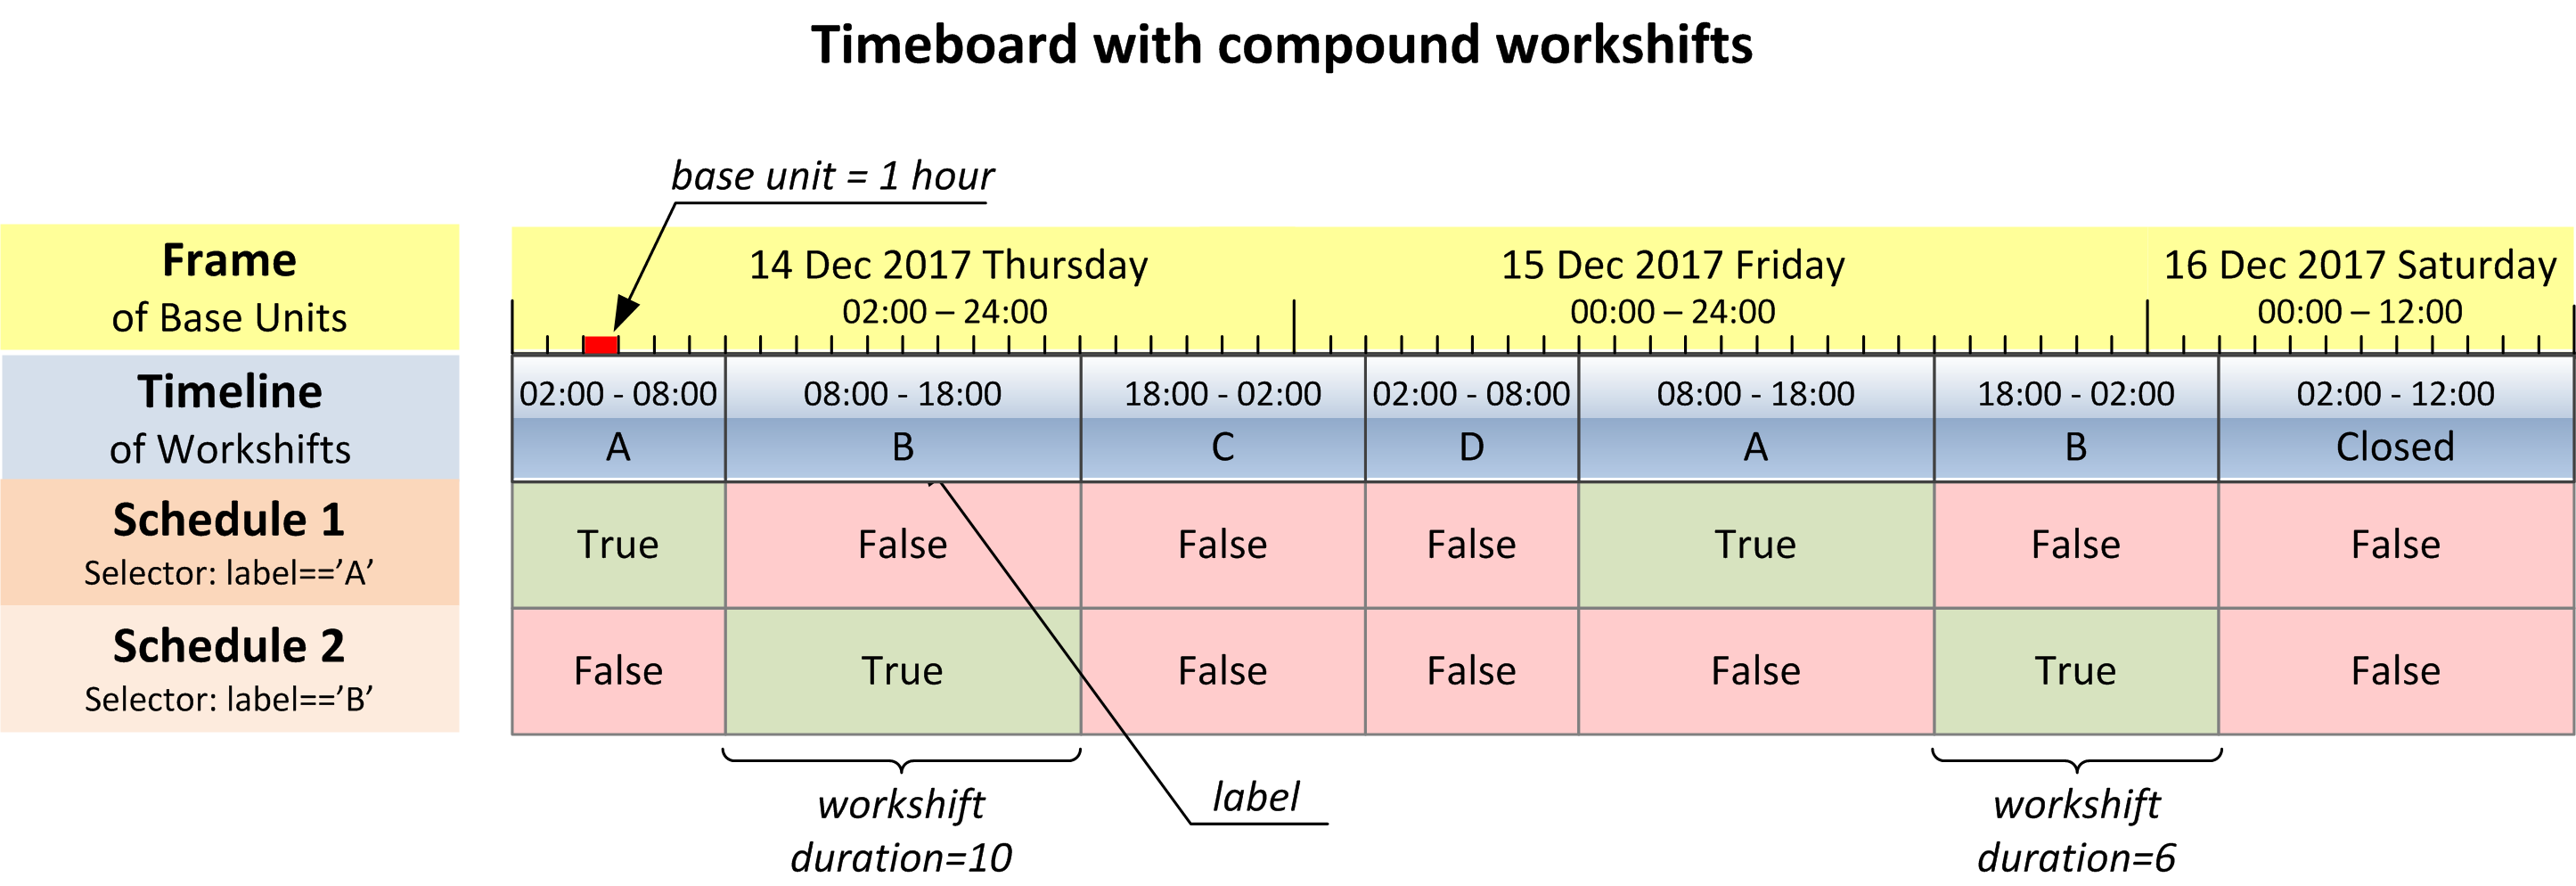 _images/compound_timeboard.png